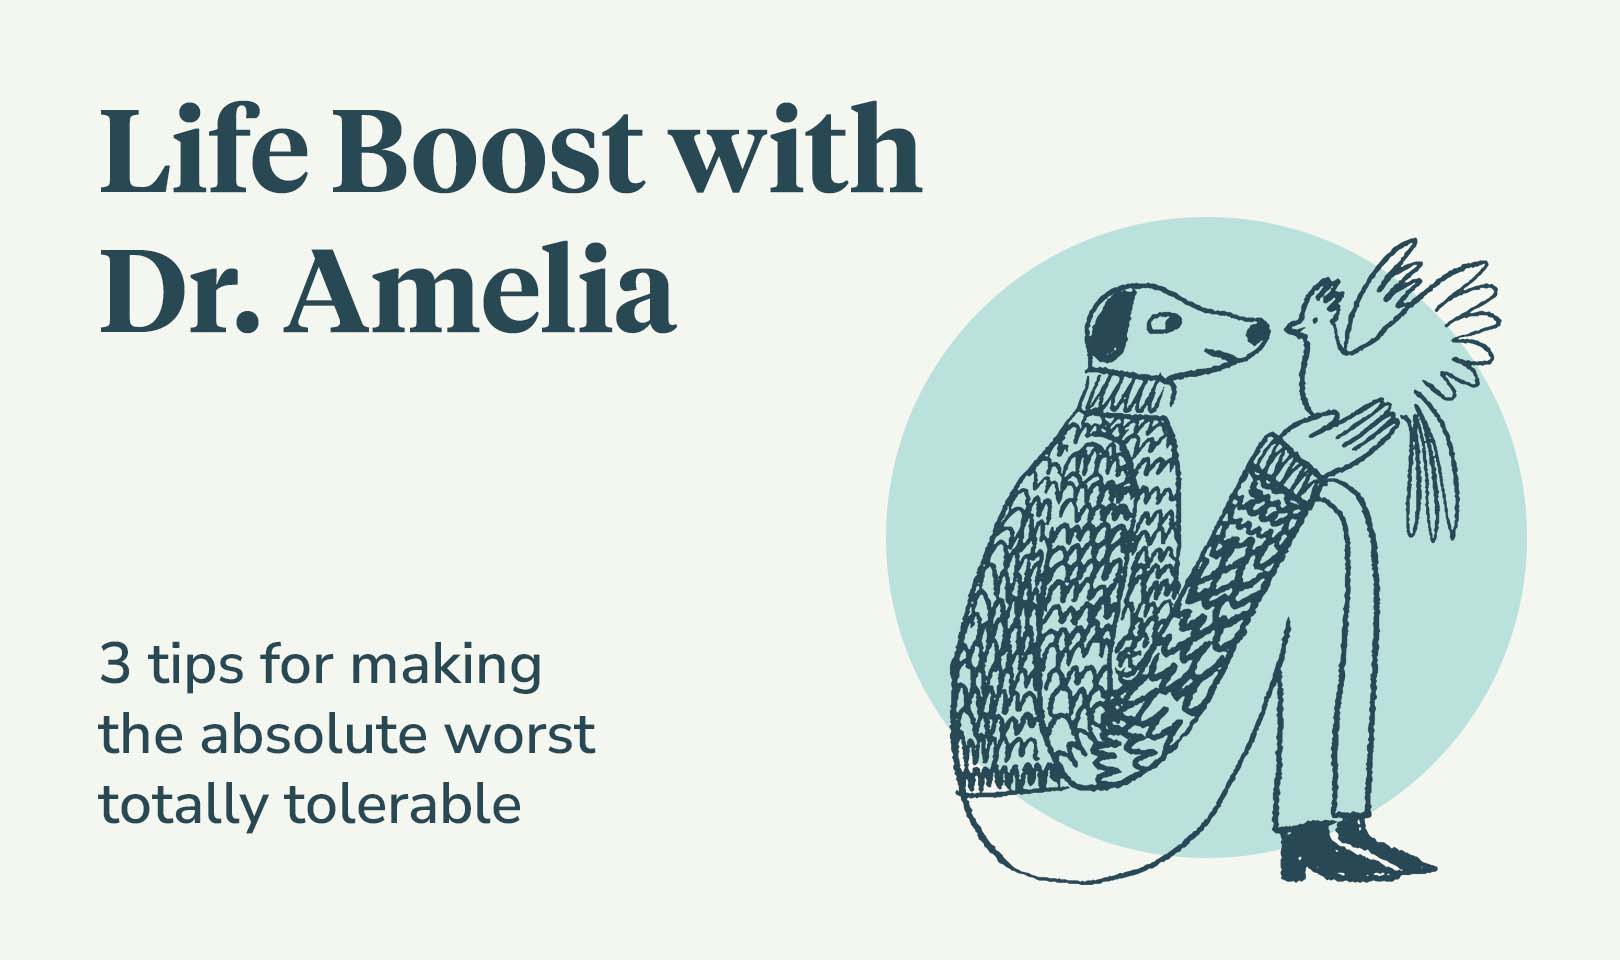 The text "Life Boost with Dr. Amelia: 3 tips for making the absolute worst totally tolerable" beside an image of an anthropomorphic dog sitting on the ground and holding a bird.